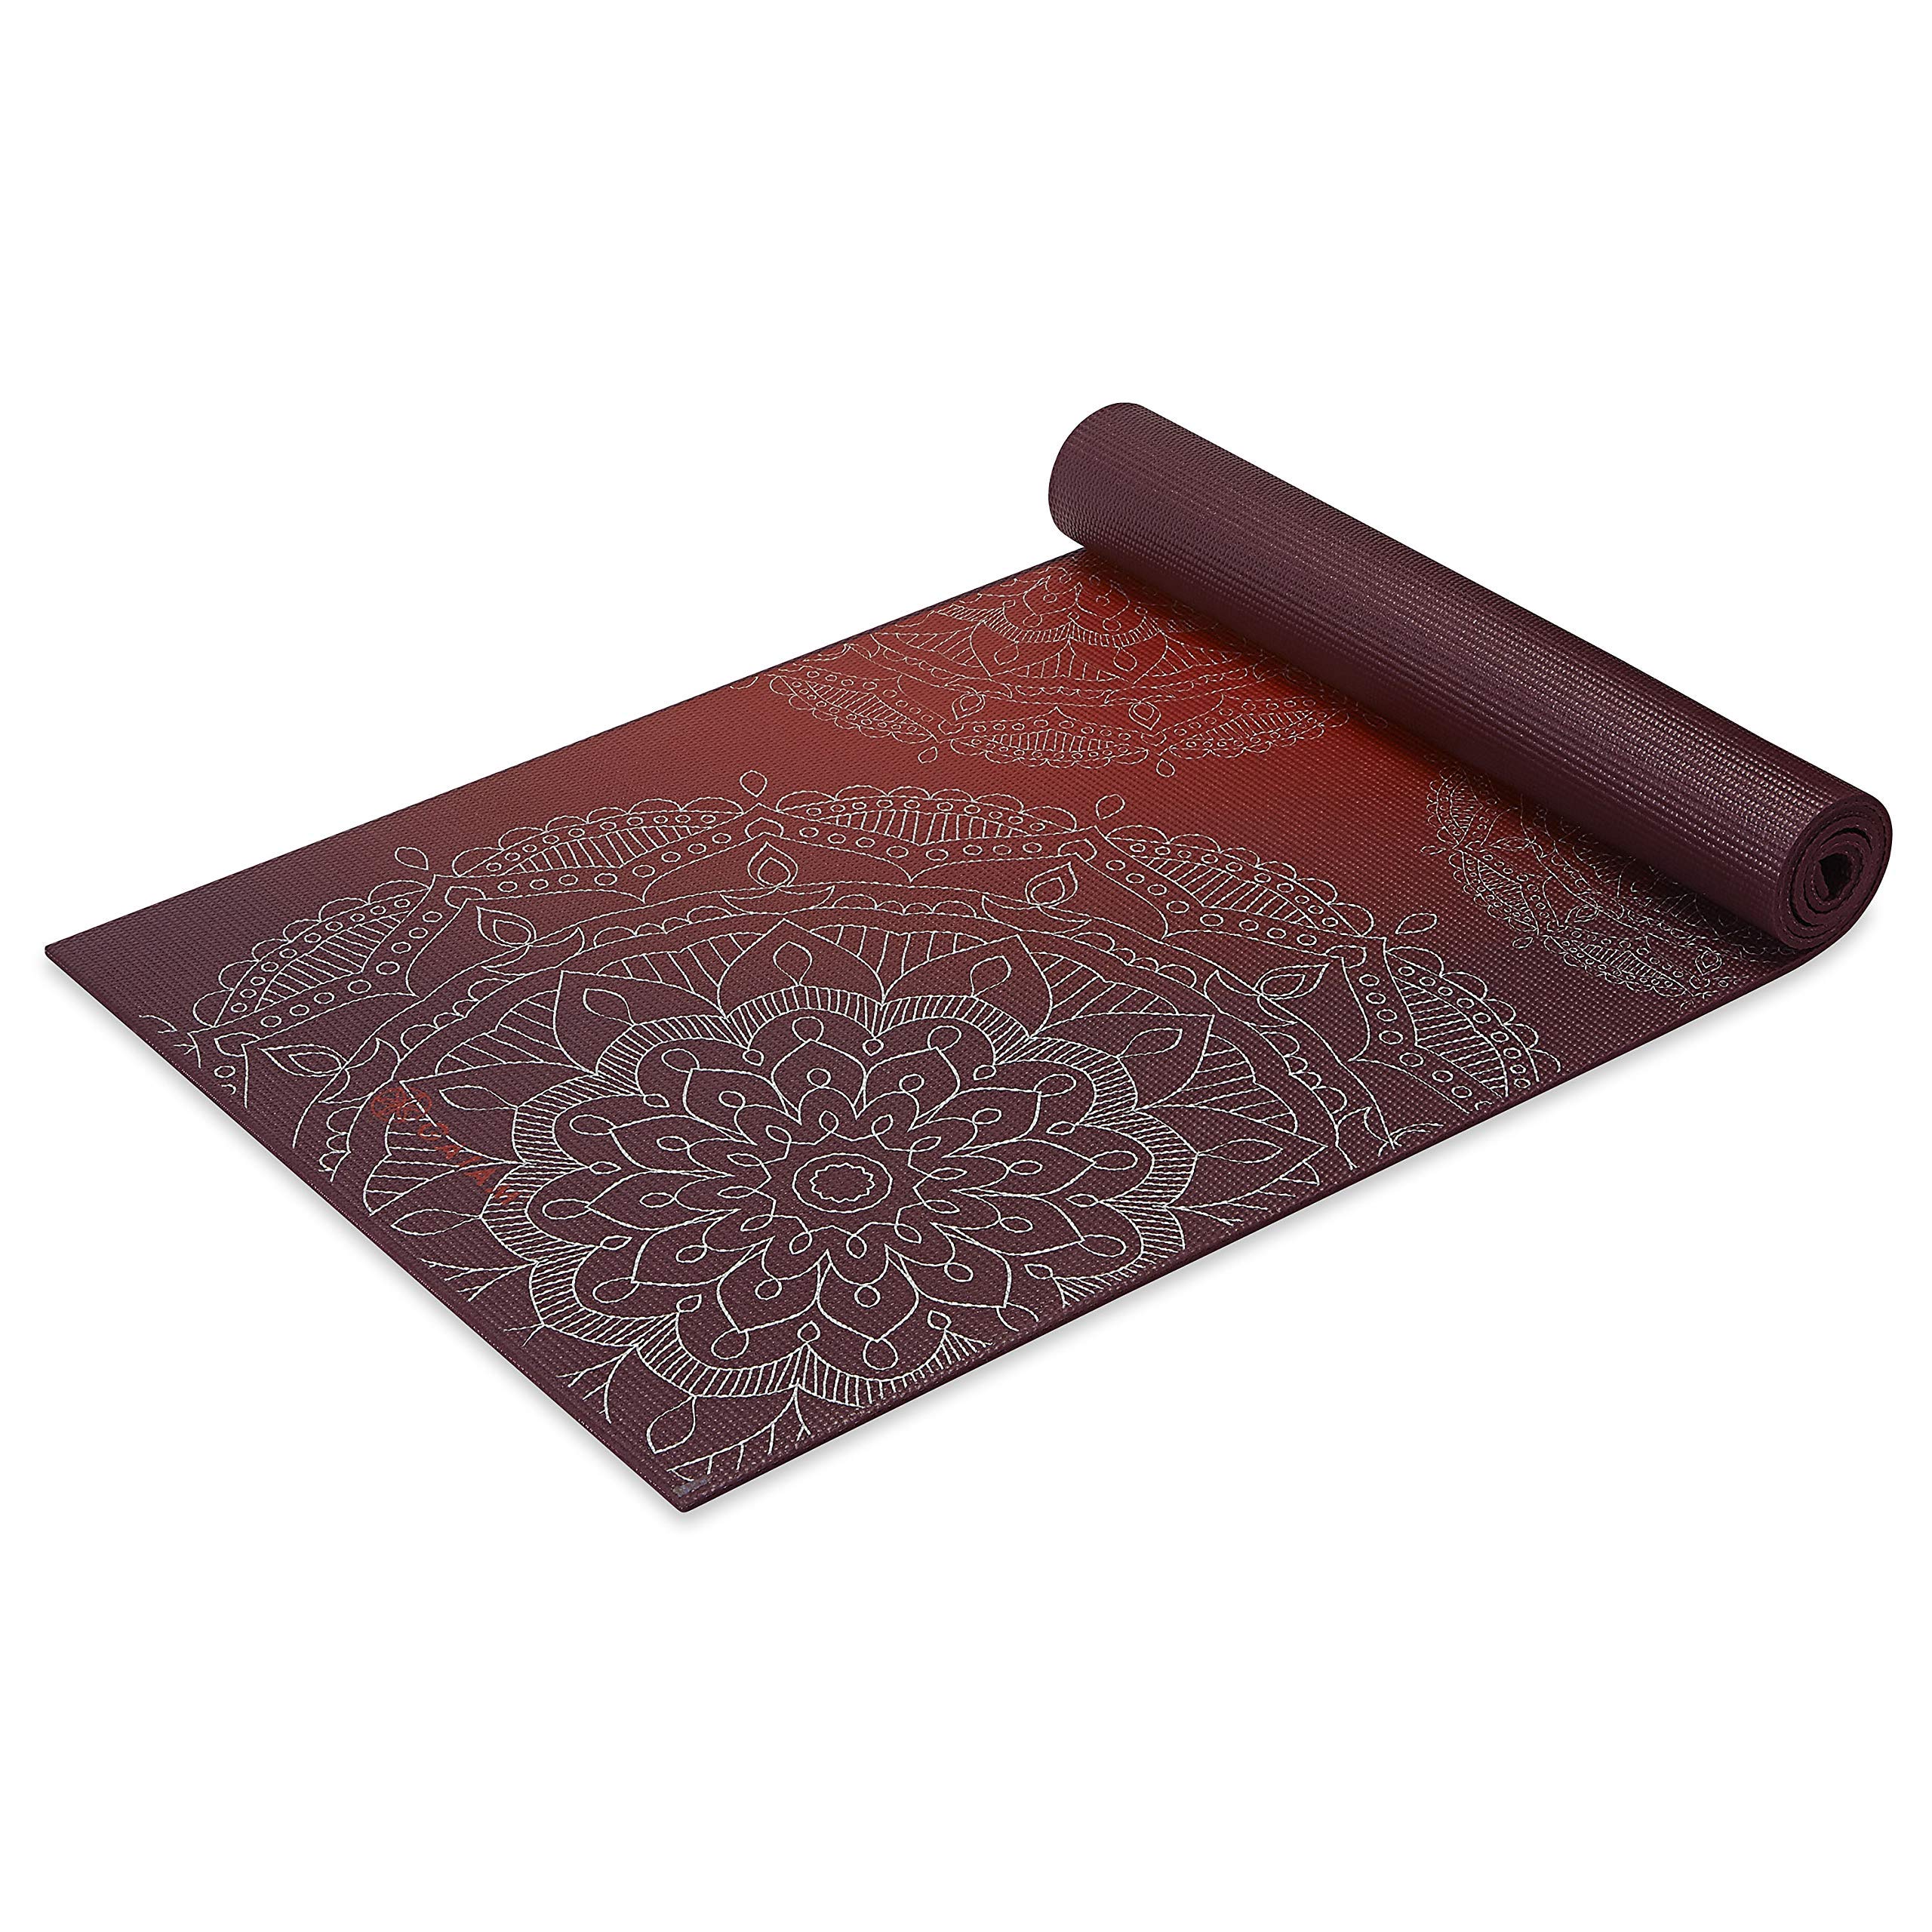 Gaiam Yoga Mat Premium Print Extra Thick Non Slip Exercise & Fitness Mat for All Types of Yoga, Pilates & Floor Workouts, Metall